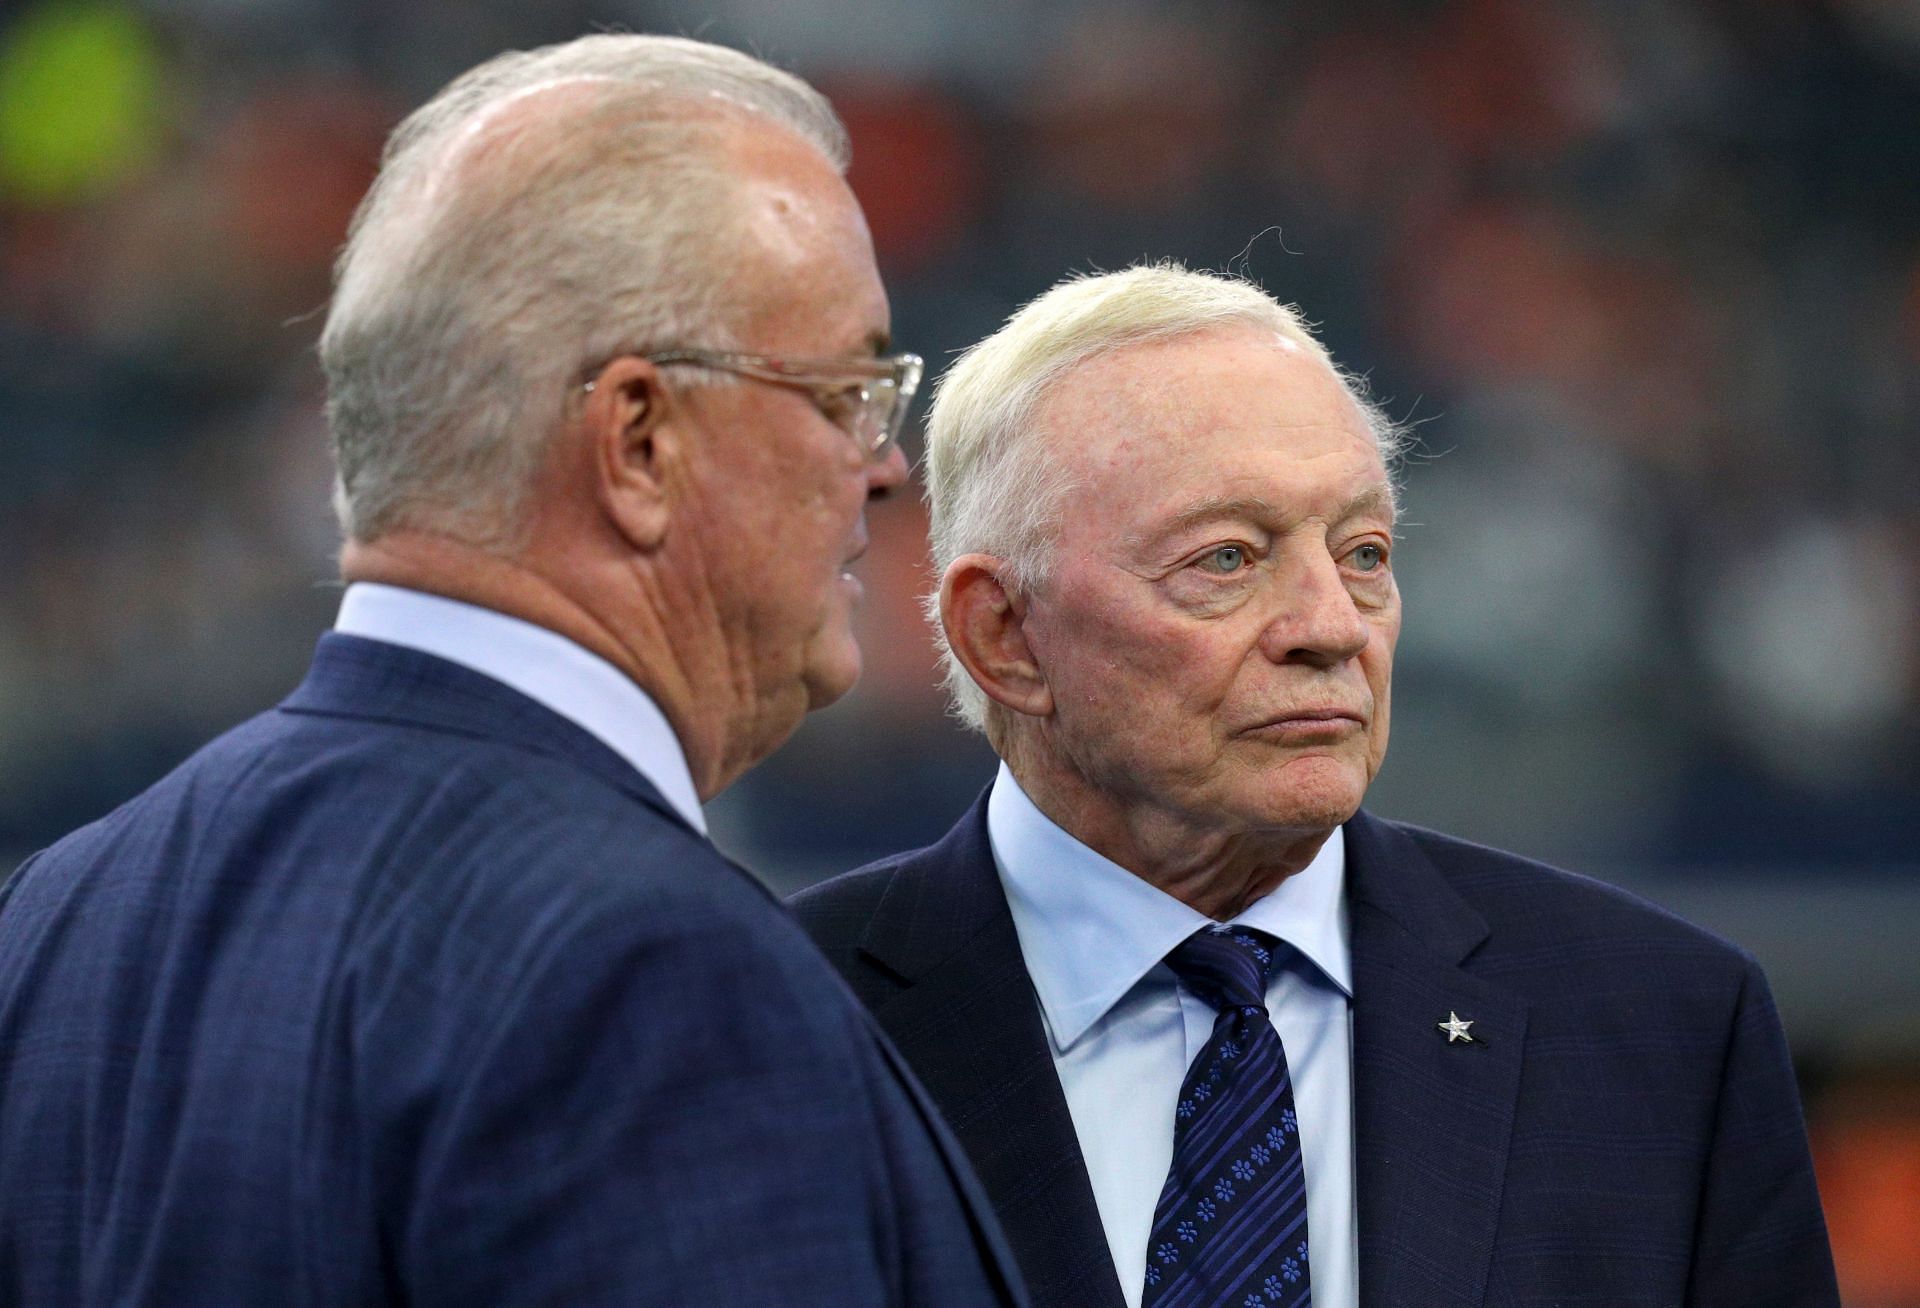 Dallas Cowboys owner Jerry Jones (right) attending an event